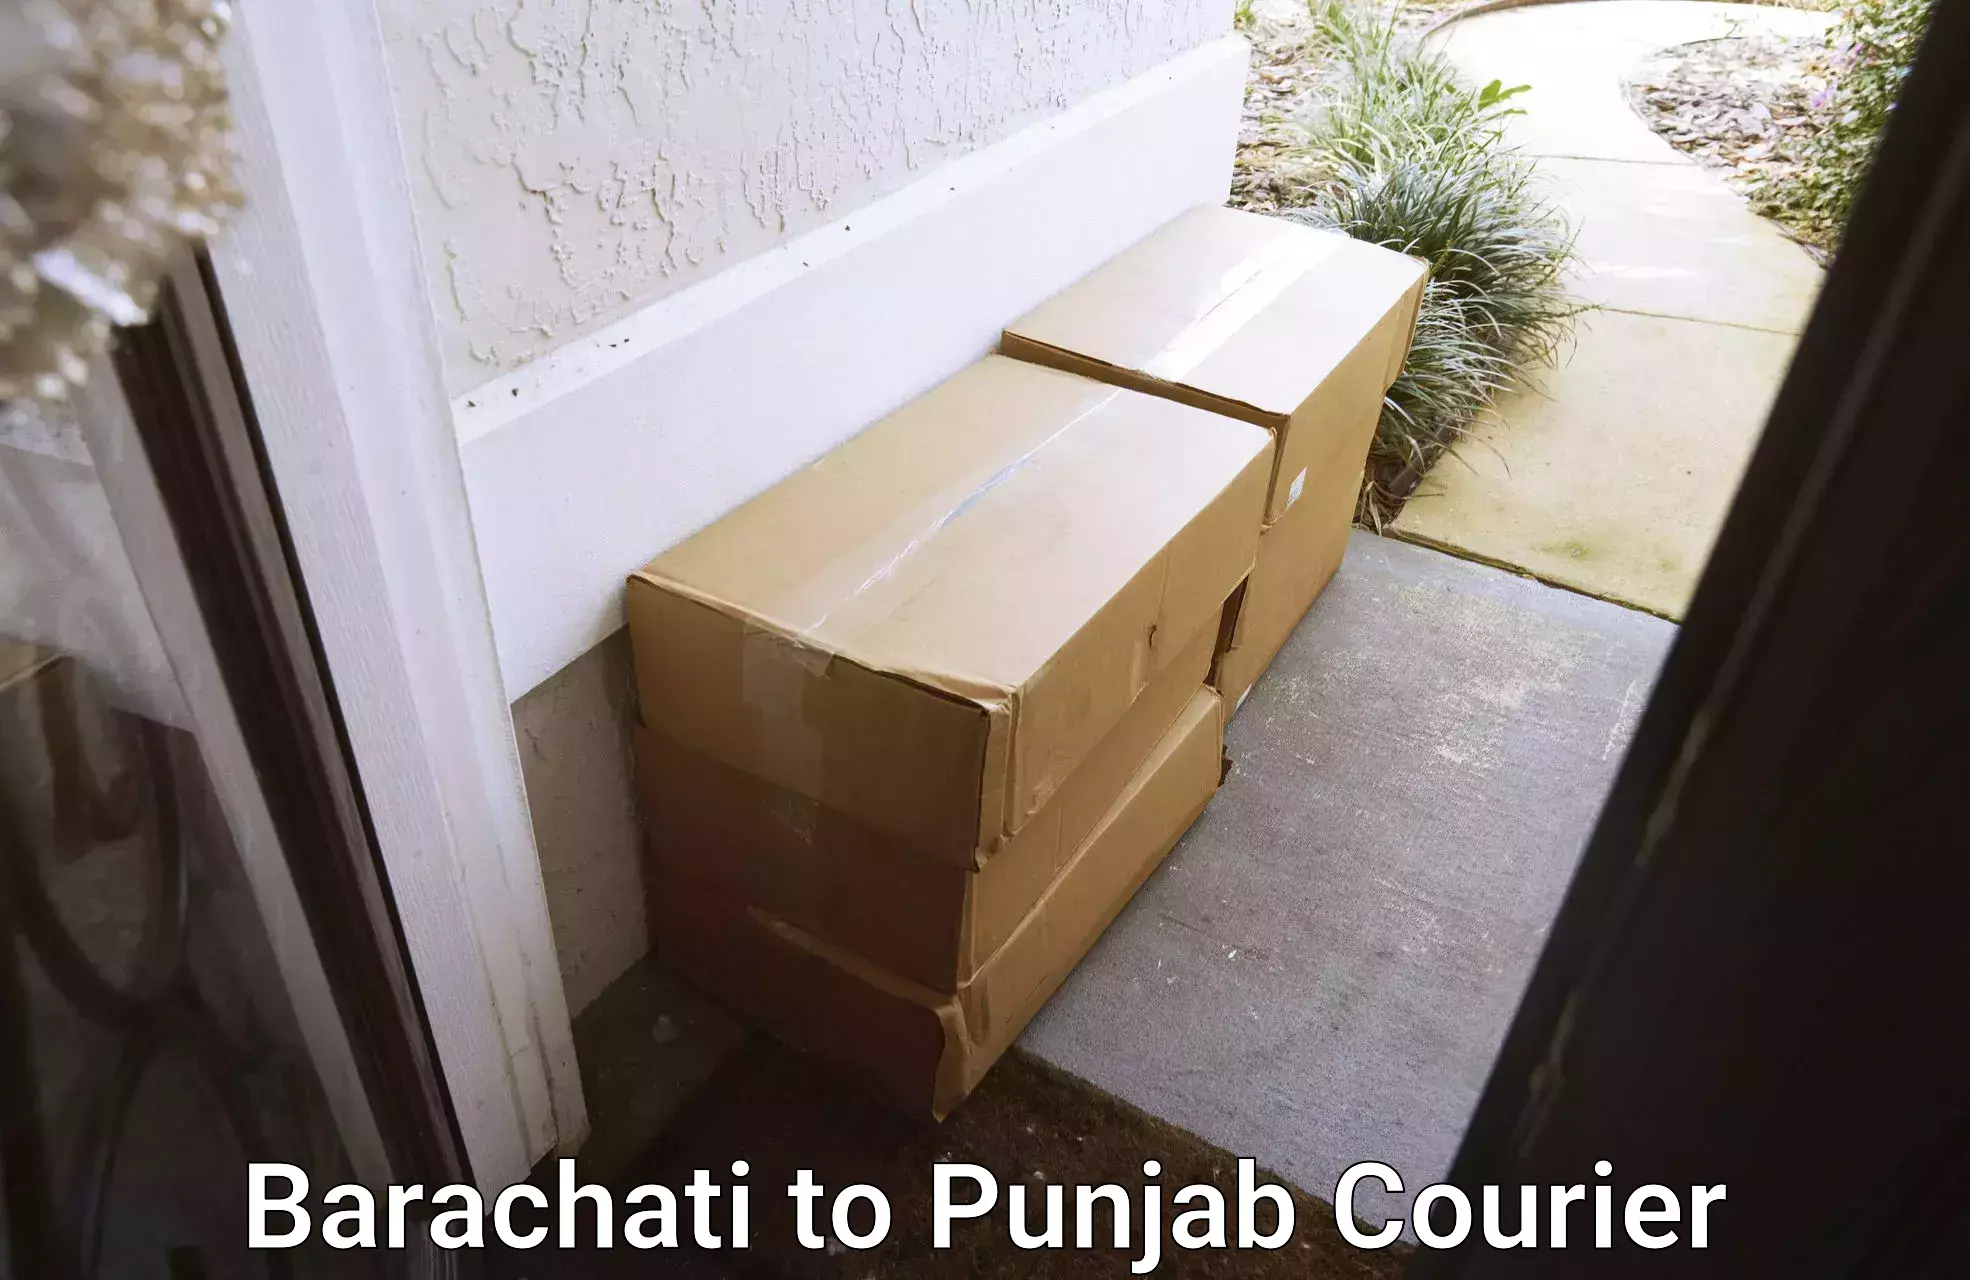 Quality moving and storage Barachati to Abohar